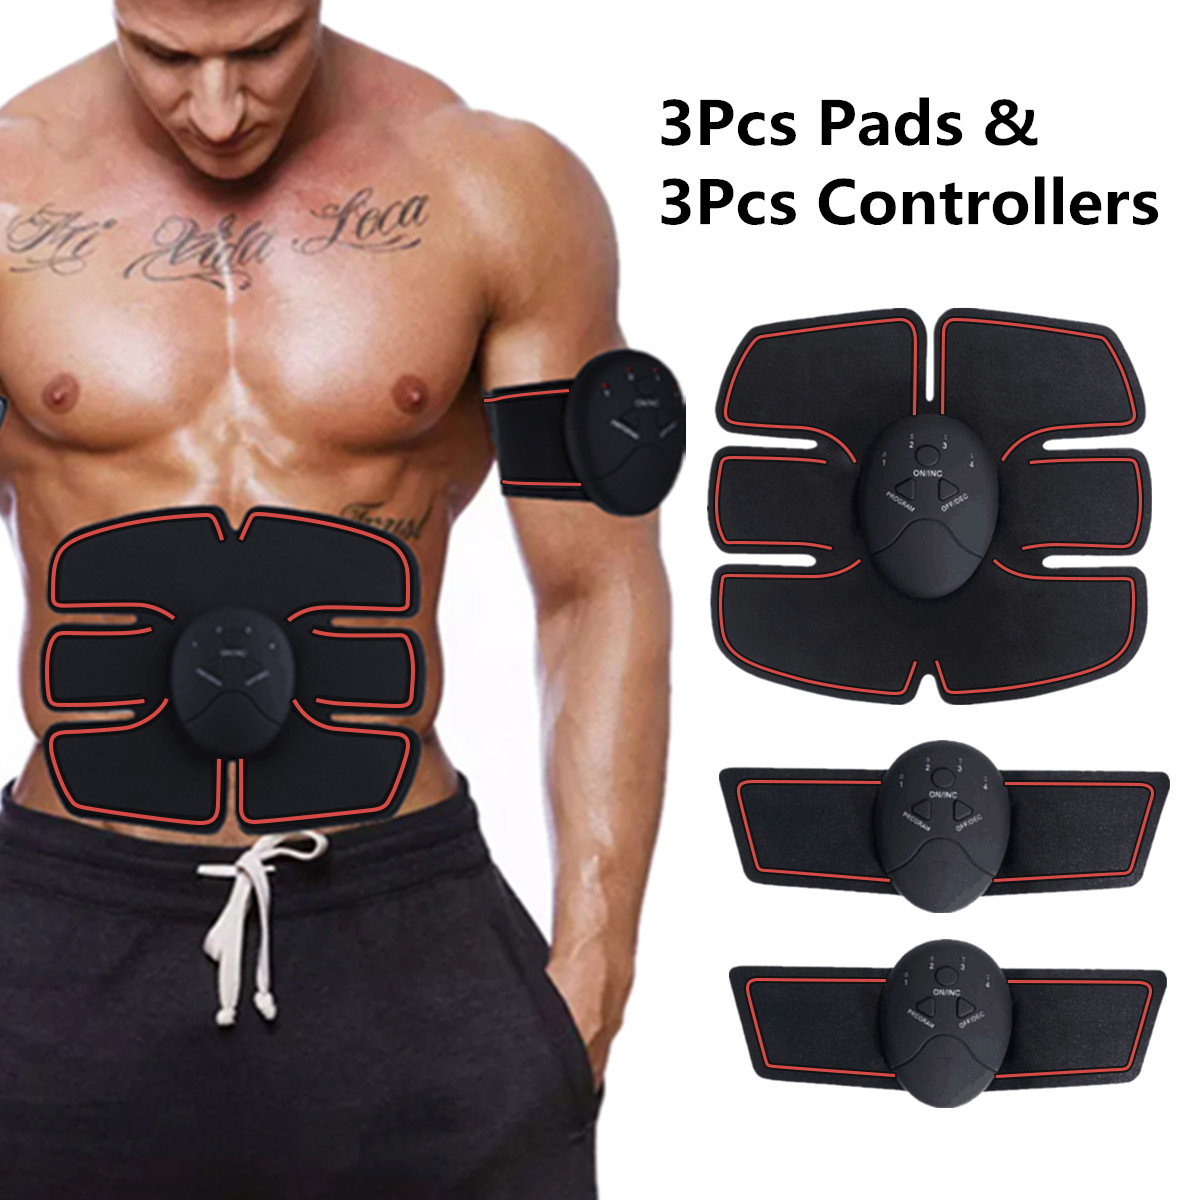 Amerteer Abs Stimulator,Muscle Toner,Ab Muscle Stimulator Belt,Abdominal Toner Training Device for Muscles,Wireless Ab Machine Workout Equipment Portable for Men & Women - image 1 of 8